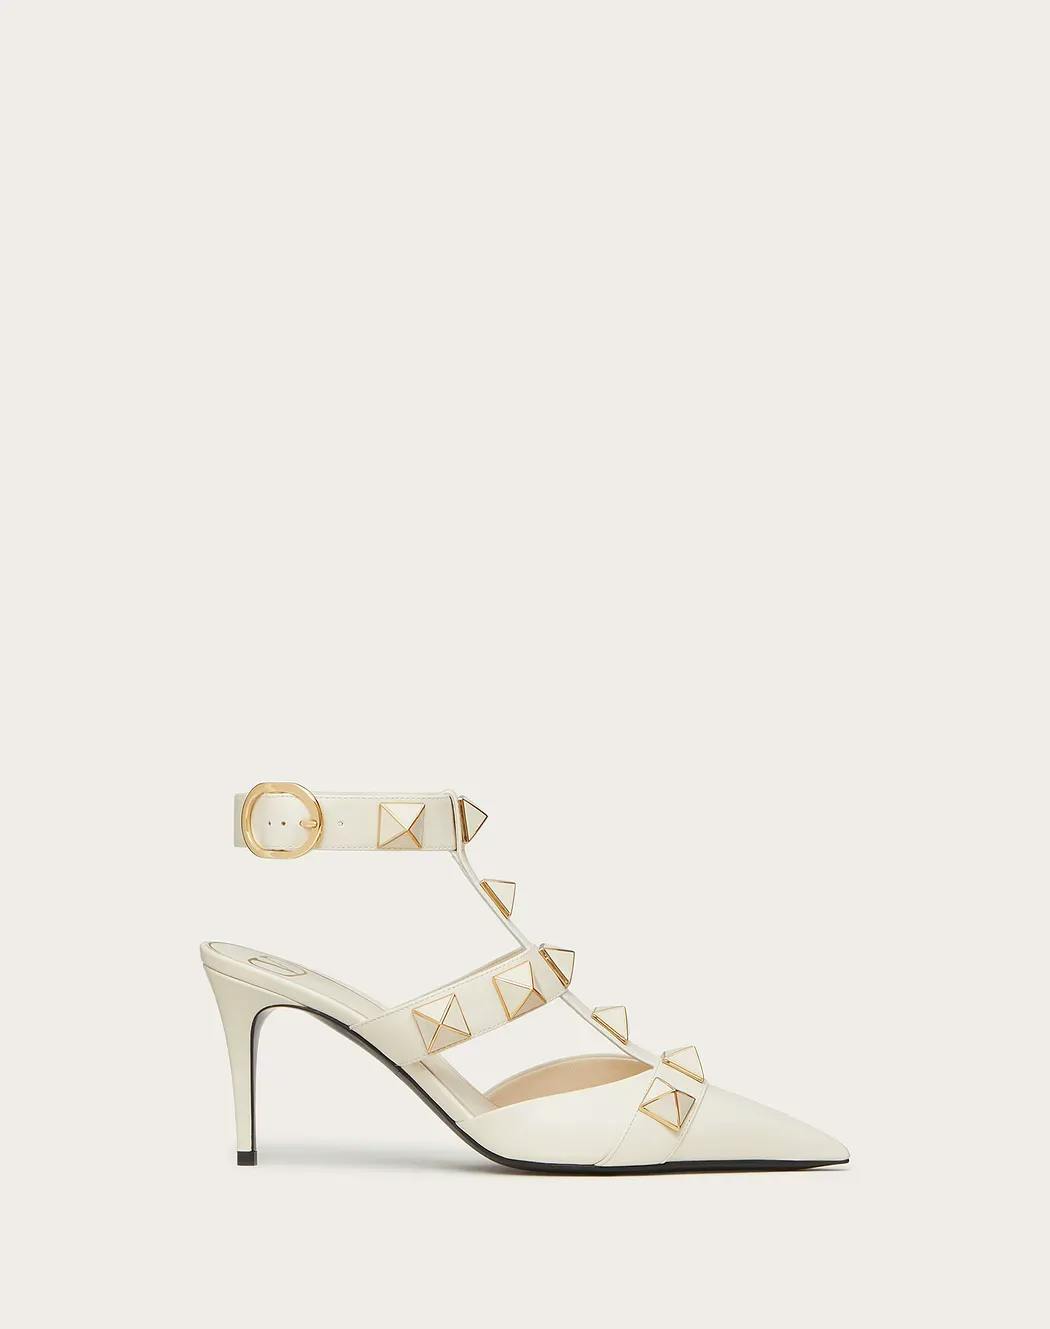 A stylish high-heeled shoe in white leather featuring a pointed toe design, pyramid stud embellishments, and an ankle strap with a buckle. The shoe has a mid-height stiletto heel and a T-strap connecting the toe area to the ankle strap.